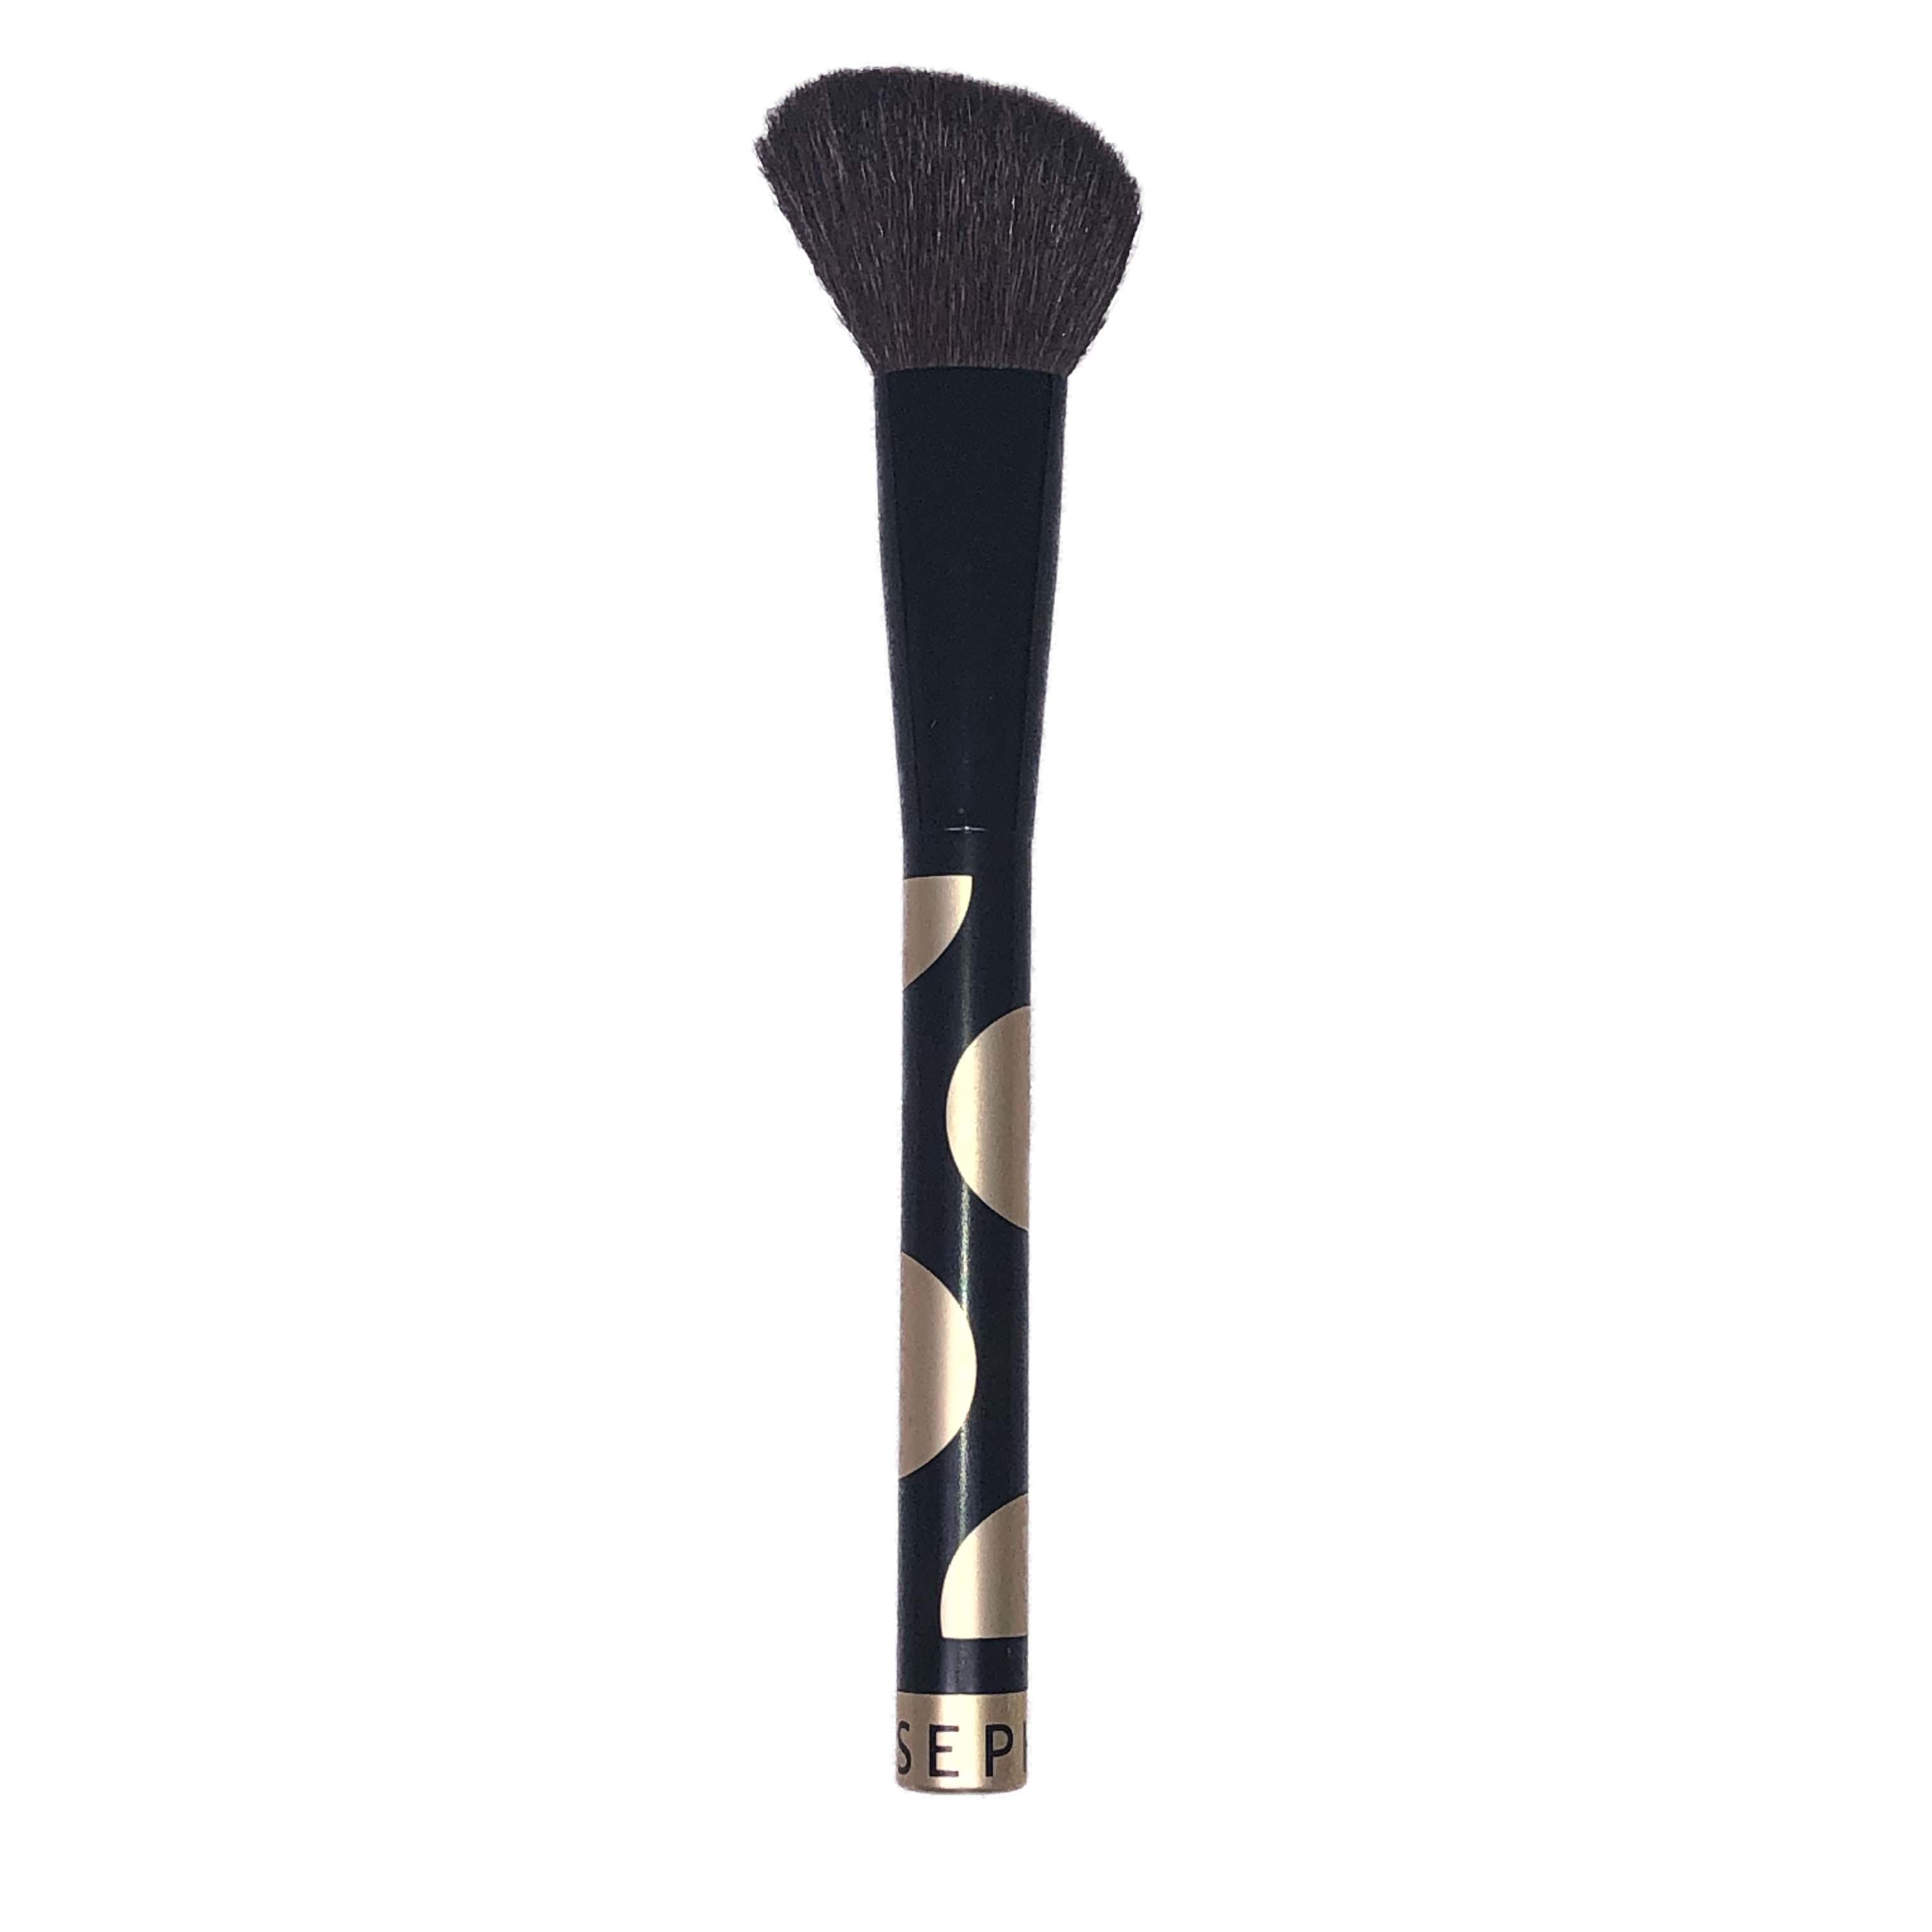 Sephora Large Angled Blush Brush Minnie Mouse Collection